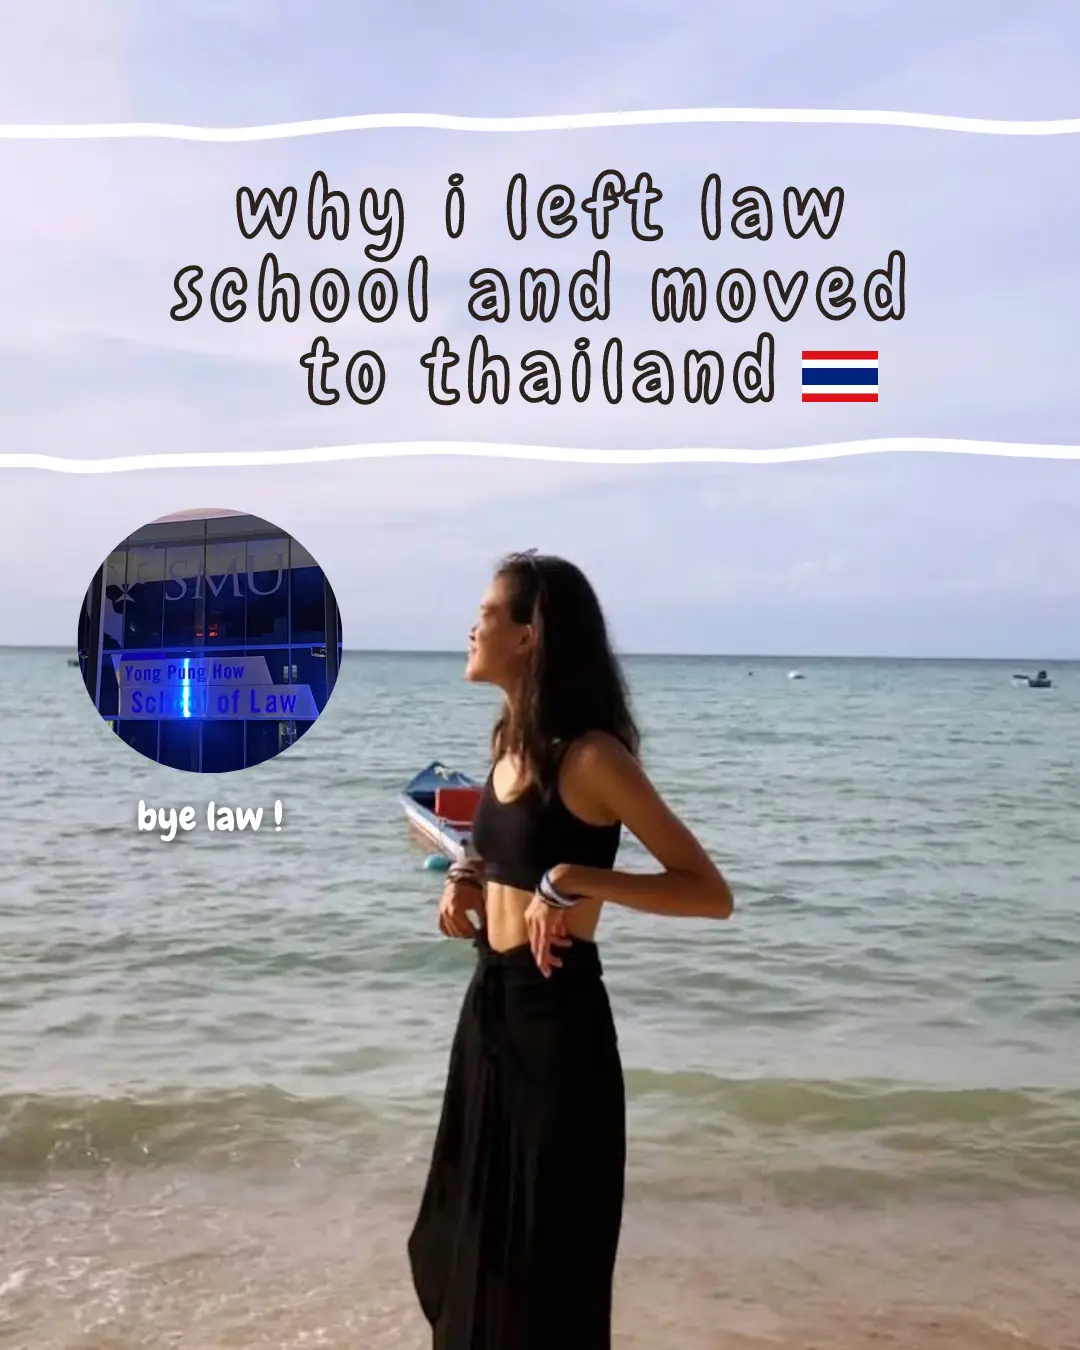 WHY I LEFT LAW SCHOOL FOR THAILAND's images(0)